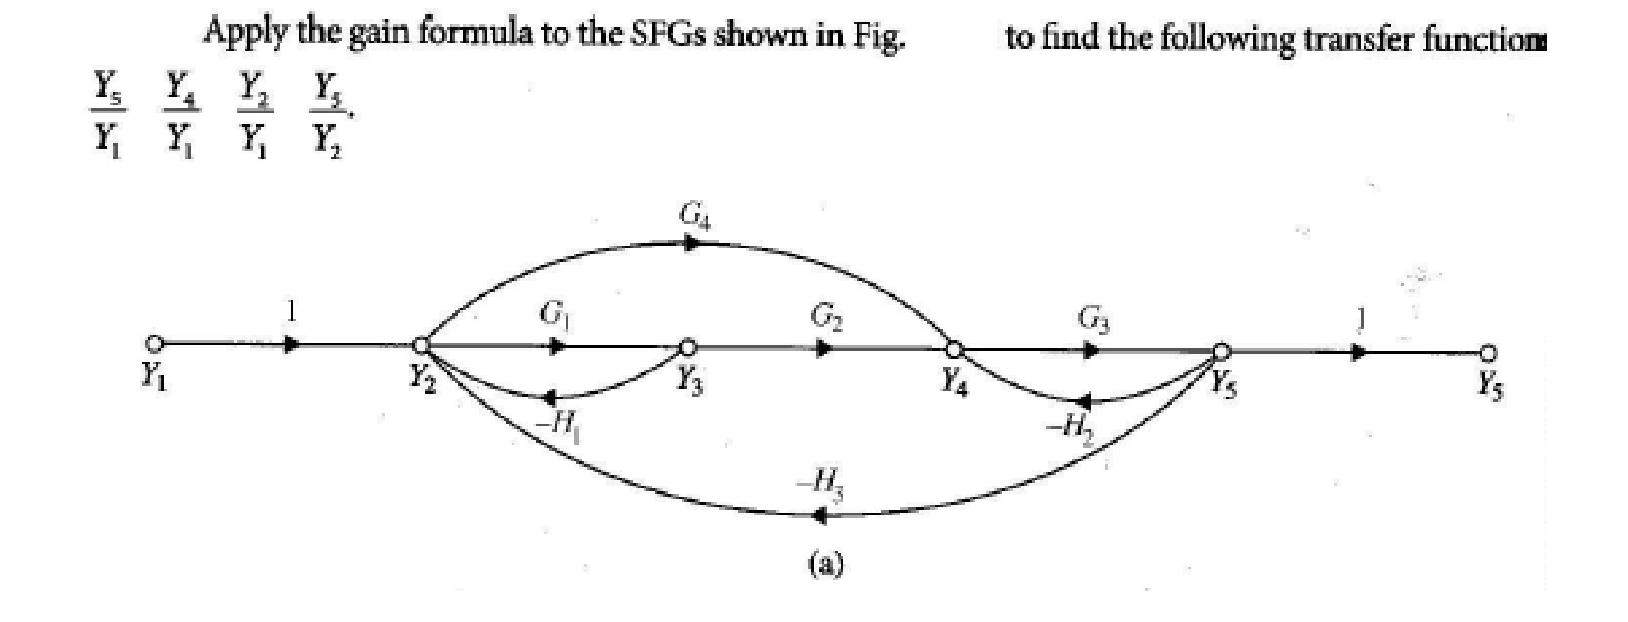 Y, Y Apply the gain formula to the SFGs shown in Fig. YY, Y, Y YY Ya H Y3 -H YA to find the following